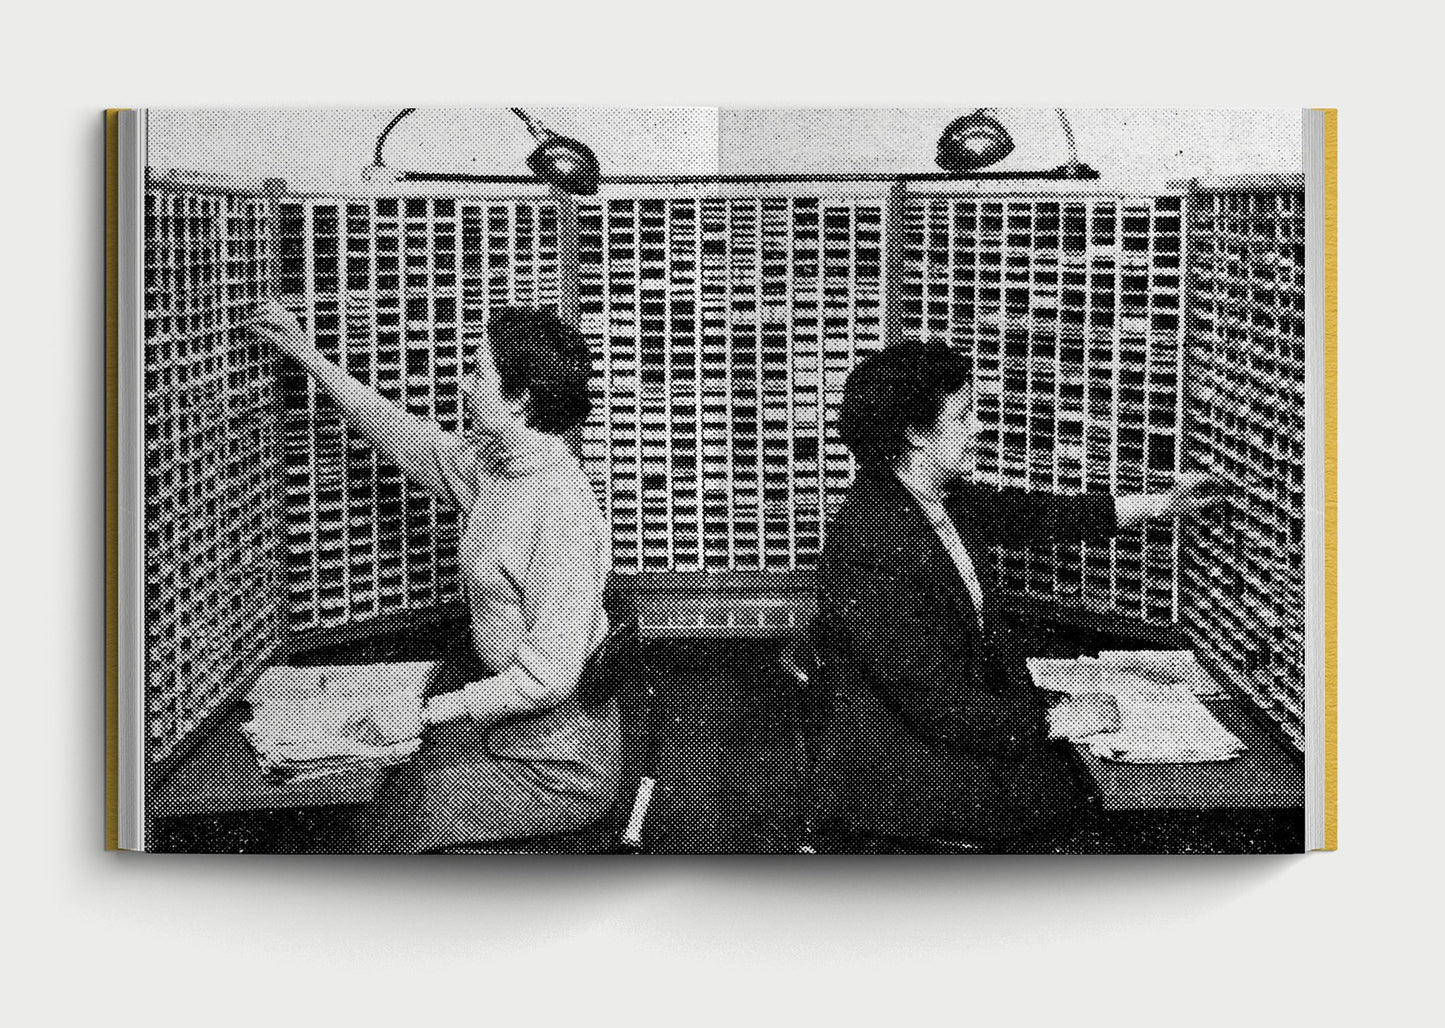 Print Punch: Artefacts from the Punch Card Computing Era